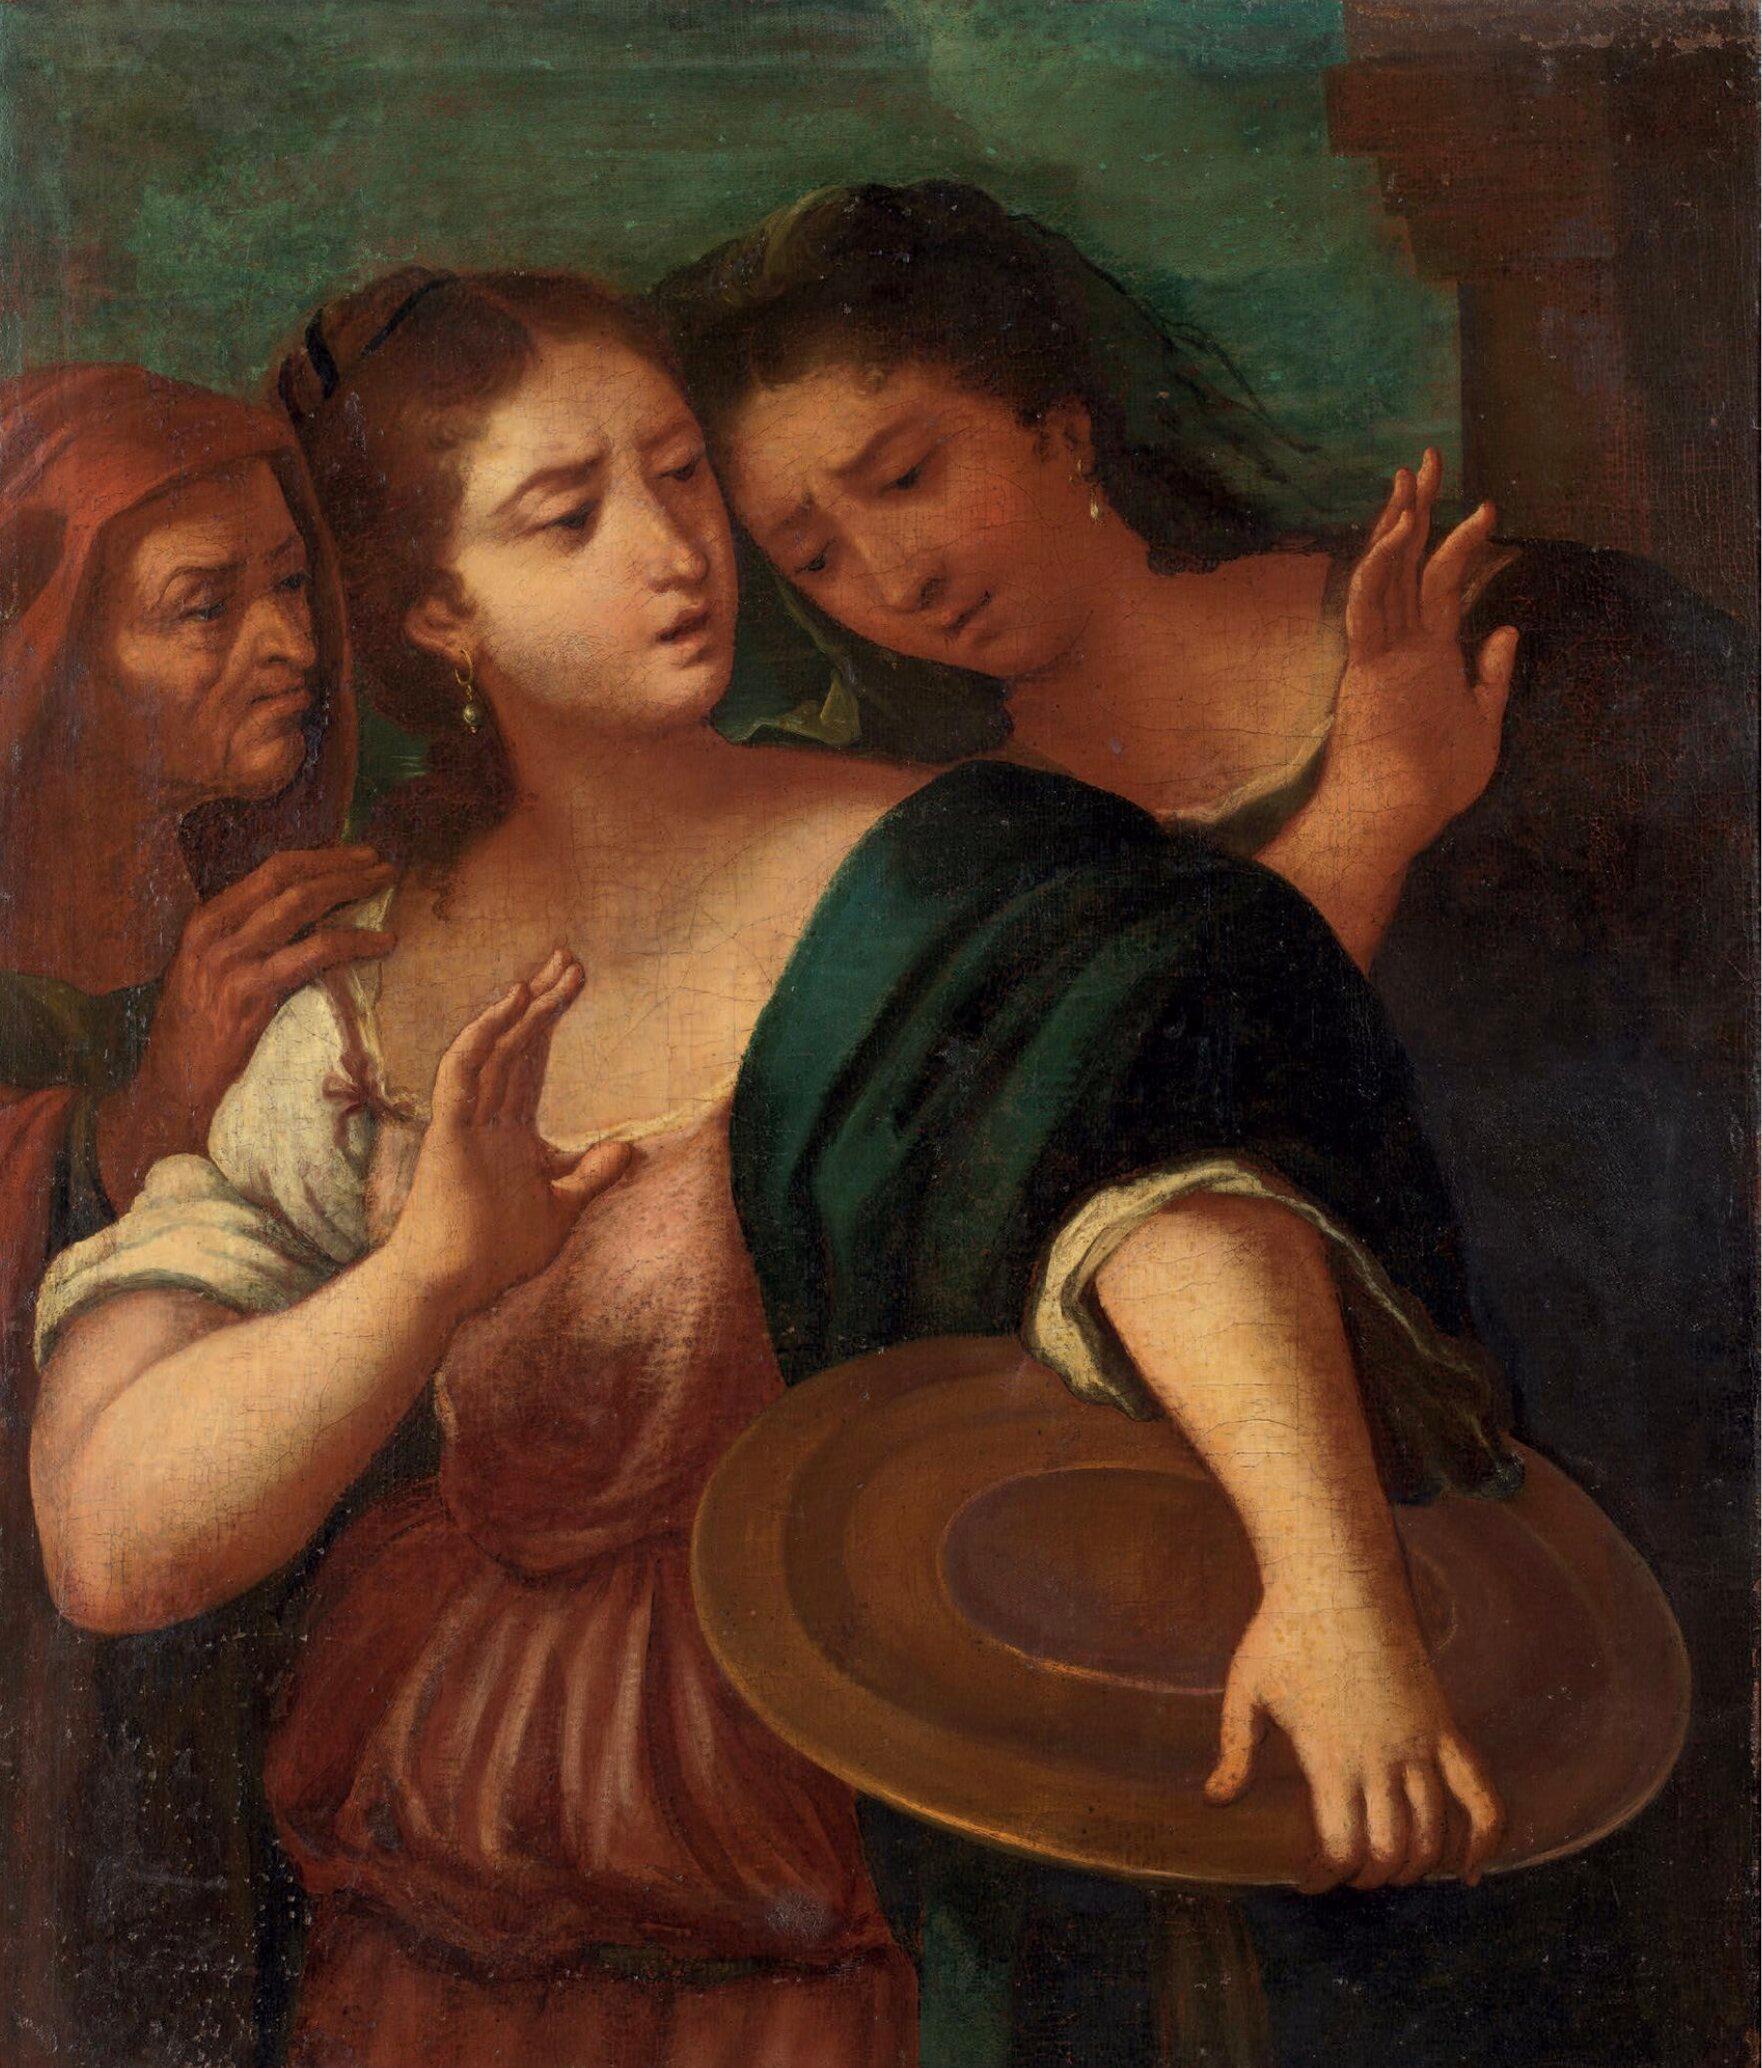 Unknown Figurative Painting - 17th Century Caravaggesque Italian School Judit with Two Servants Oil On Canvas